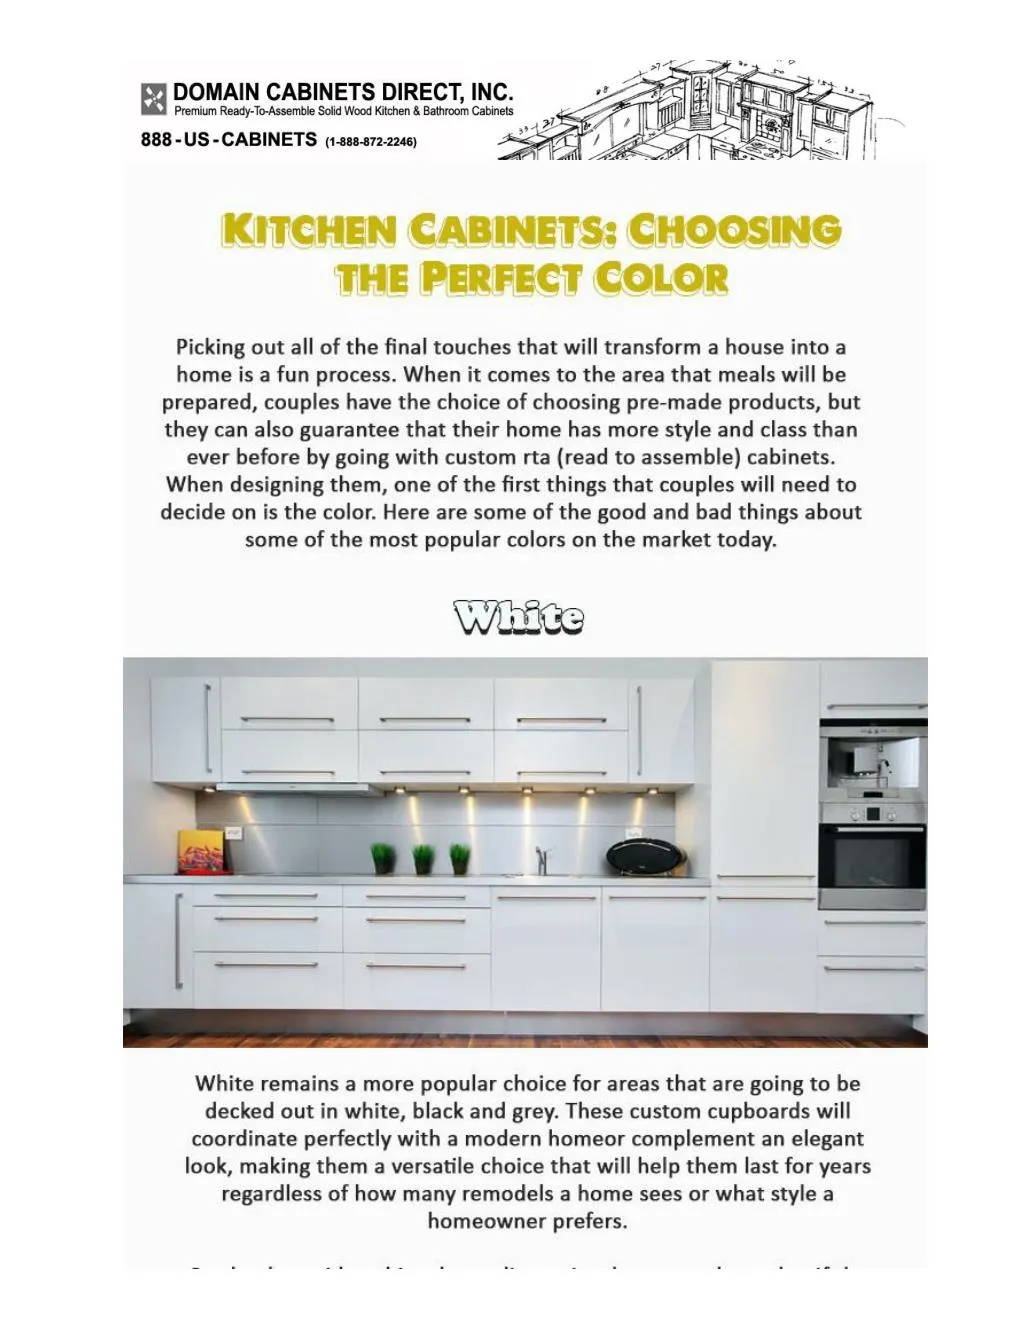 PPT - Kitchen Cabinets Choosing the Perfect Color PowerPoint ...